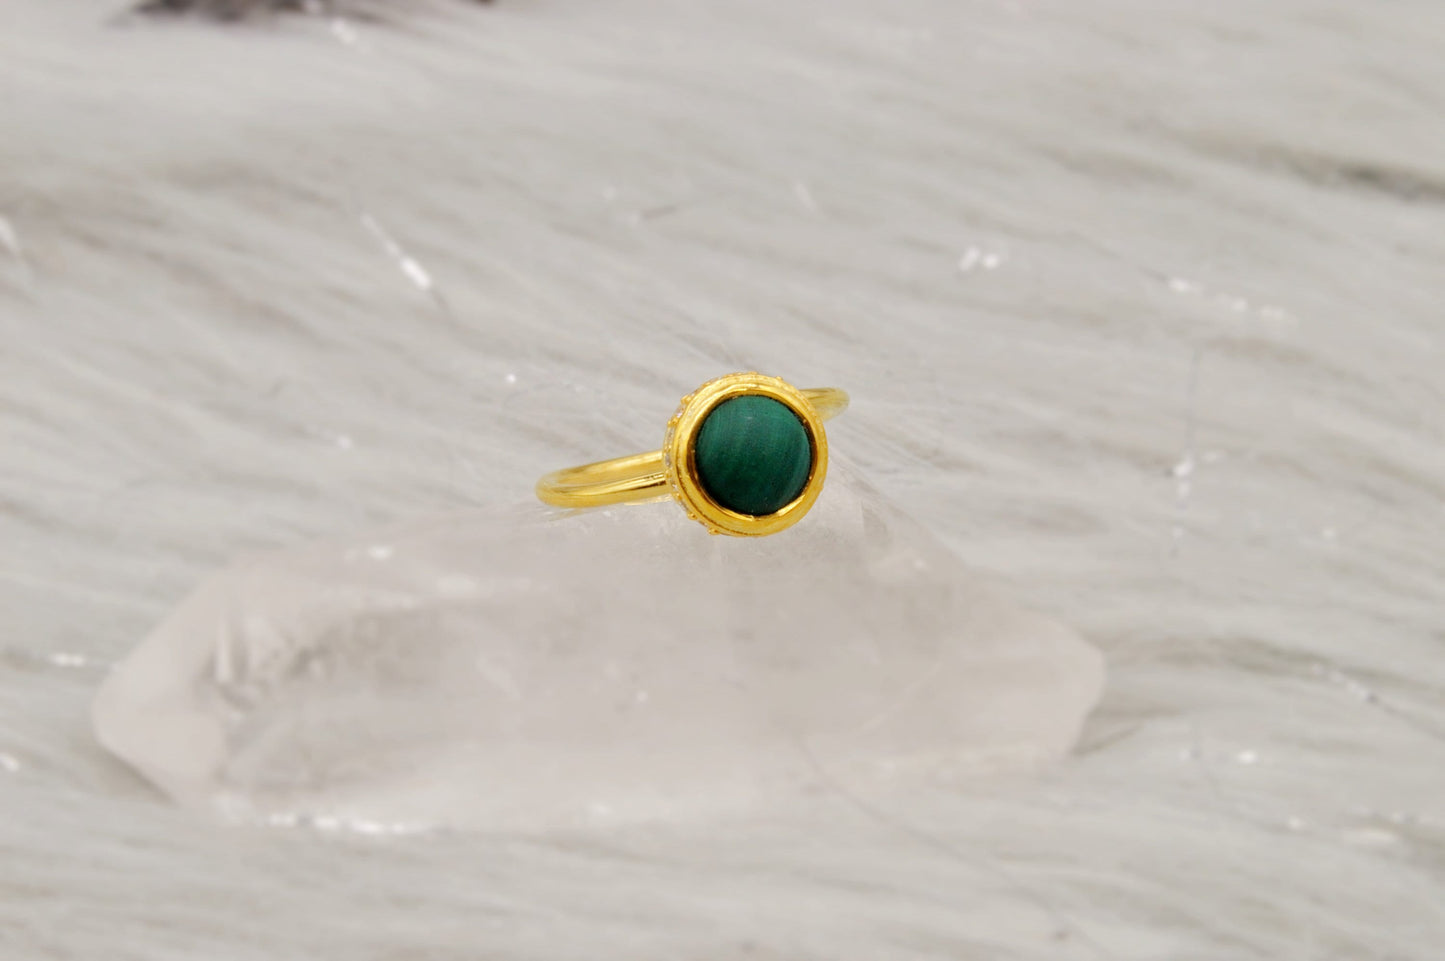 Malachite, Cubic Zirconia Gold Ring, Dainty CZ Ring, Green Gemstone, Malachite Jewelry, Unique Gemstone, Gifts For Her, Rings For Women